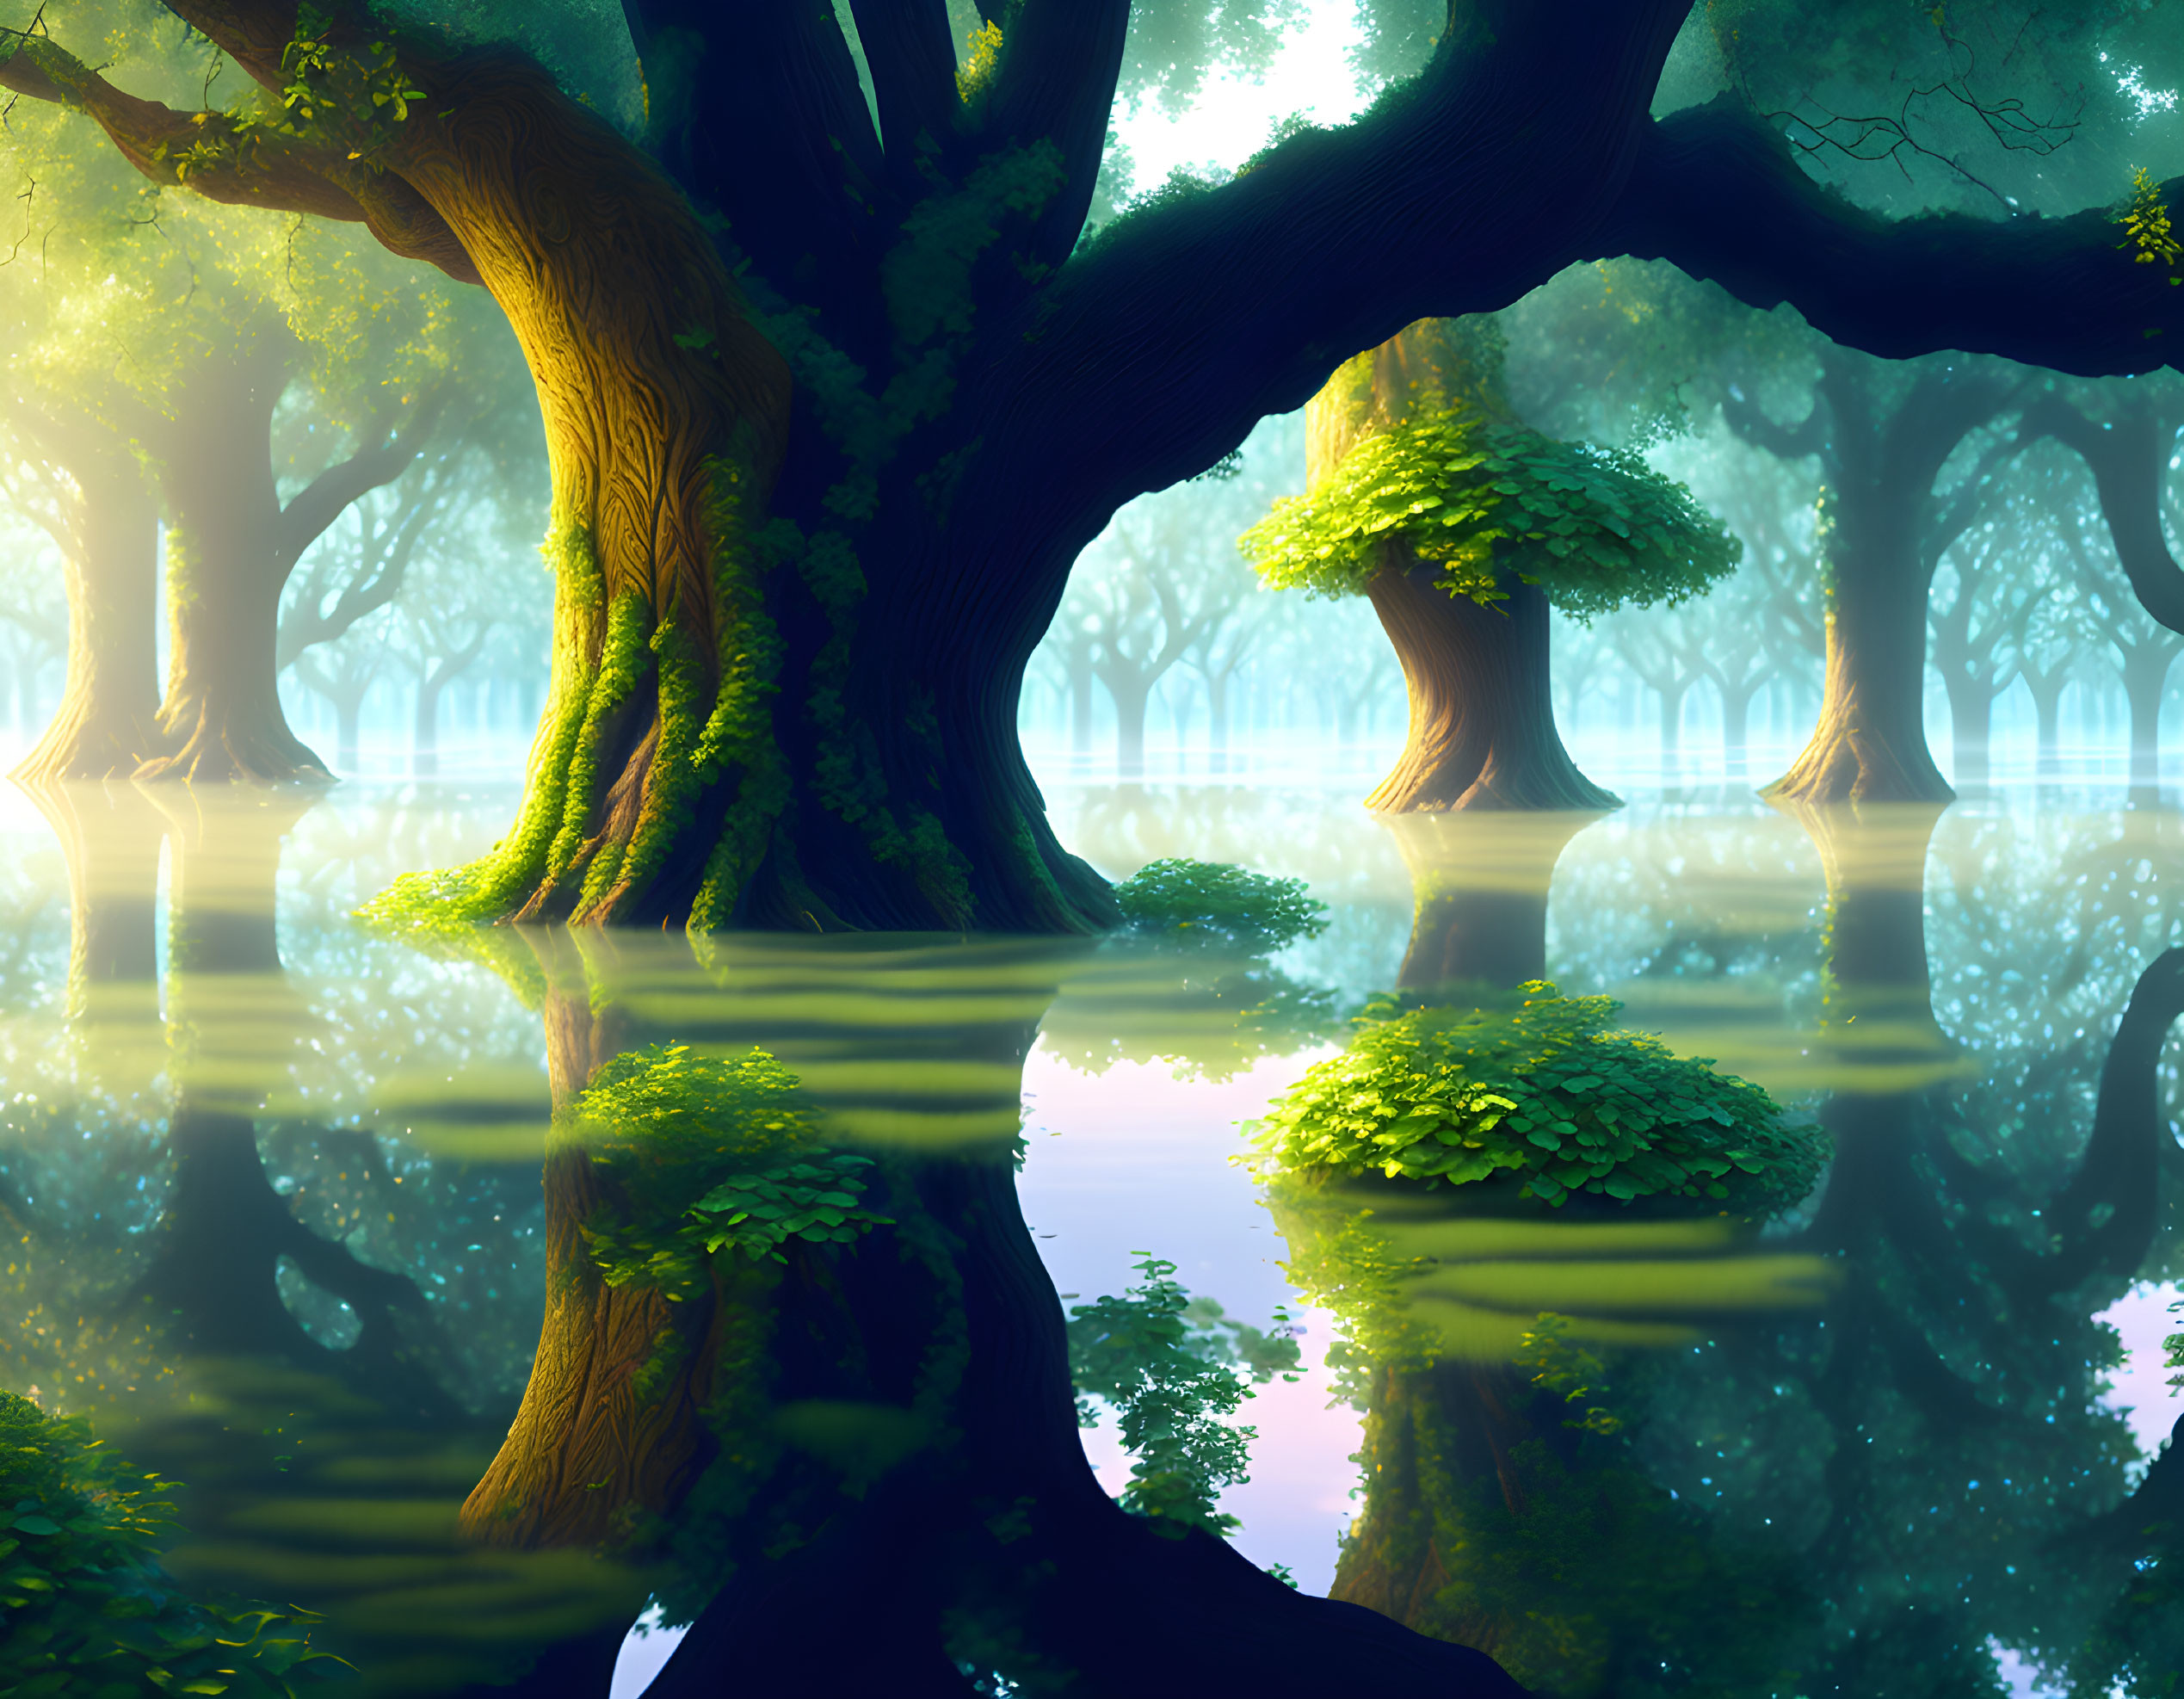 Enchanting forest with large trees and vibrant green foliage reflected in serene water.